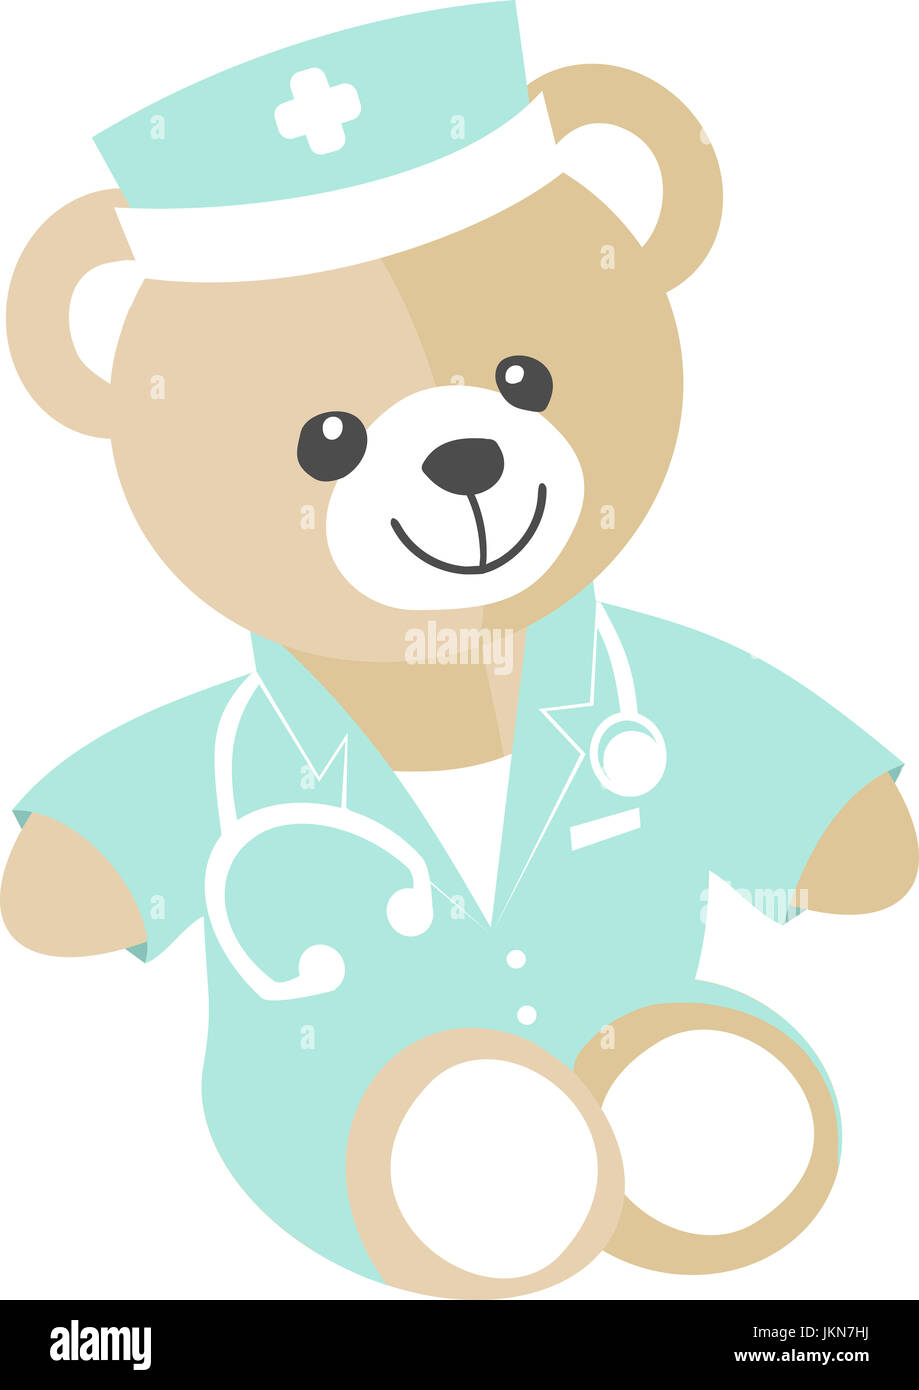 A teddy bear dressed as a doctor or nurse to explain the care and reassure the children Stock Photo